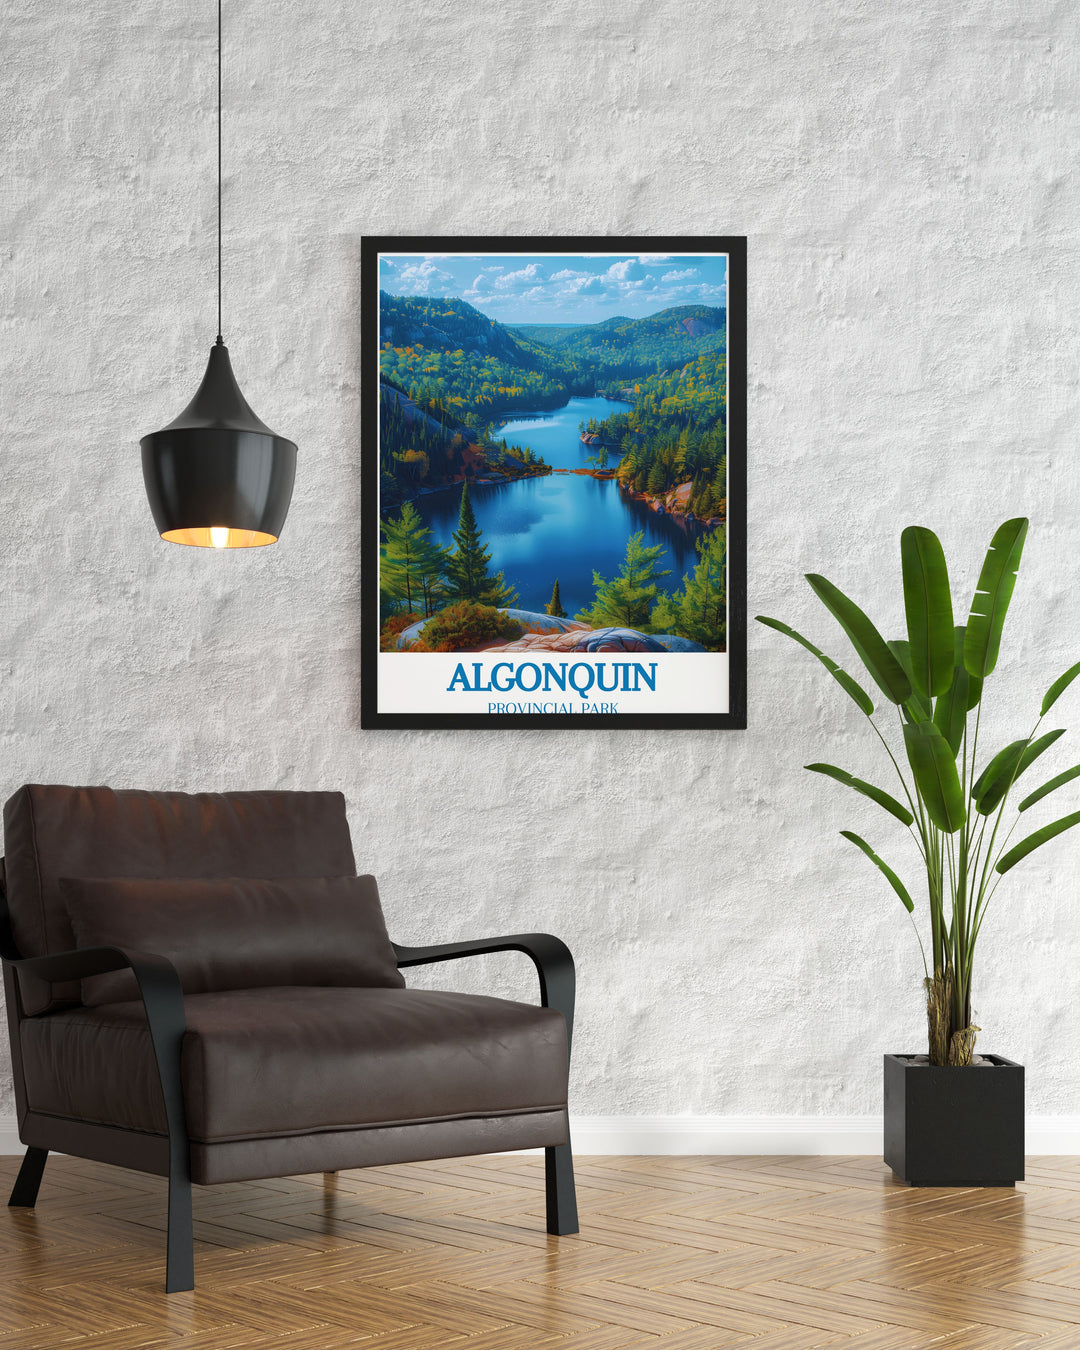 Custom print of Algonquin Provincial Park tailored to your preferences, with options for color intensity and frame style, ensuring it perfectly matches your home decor.